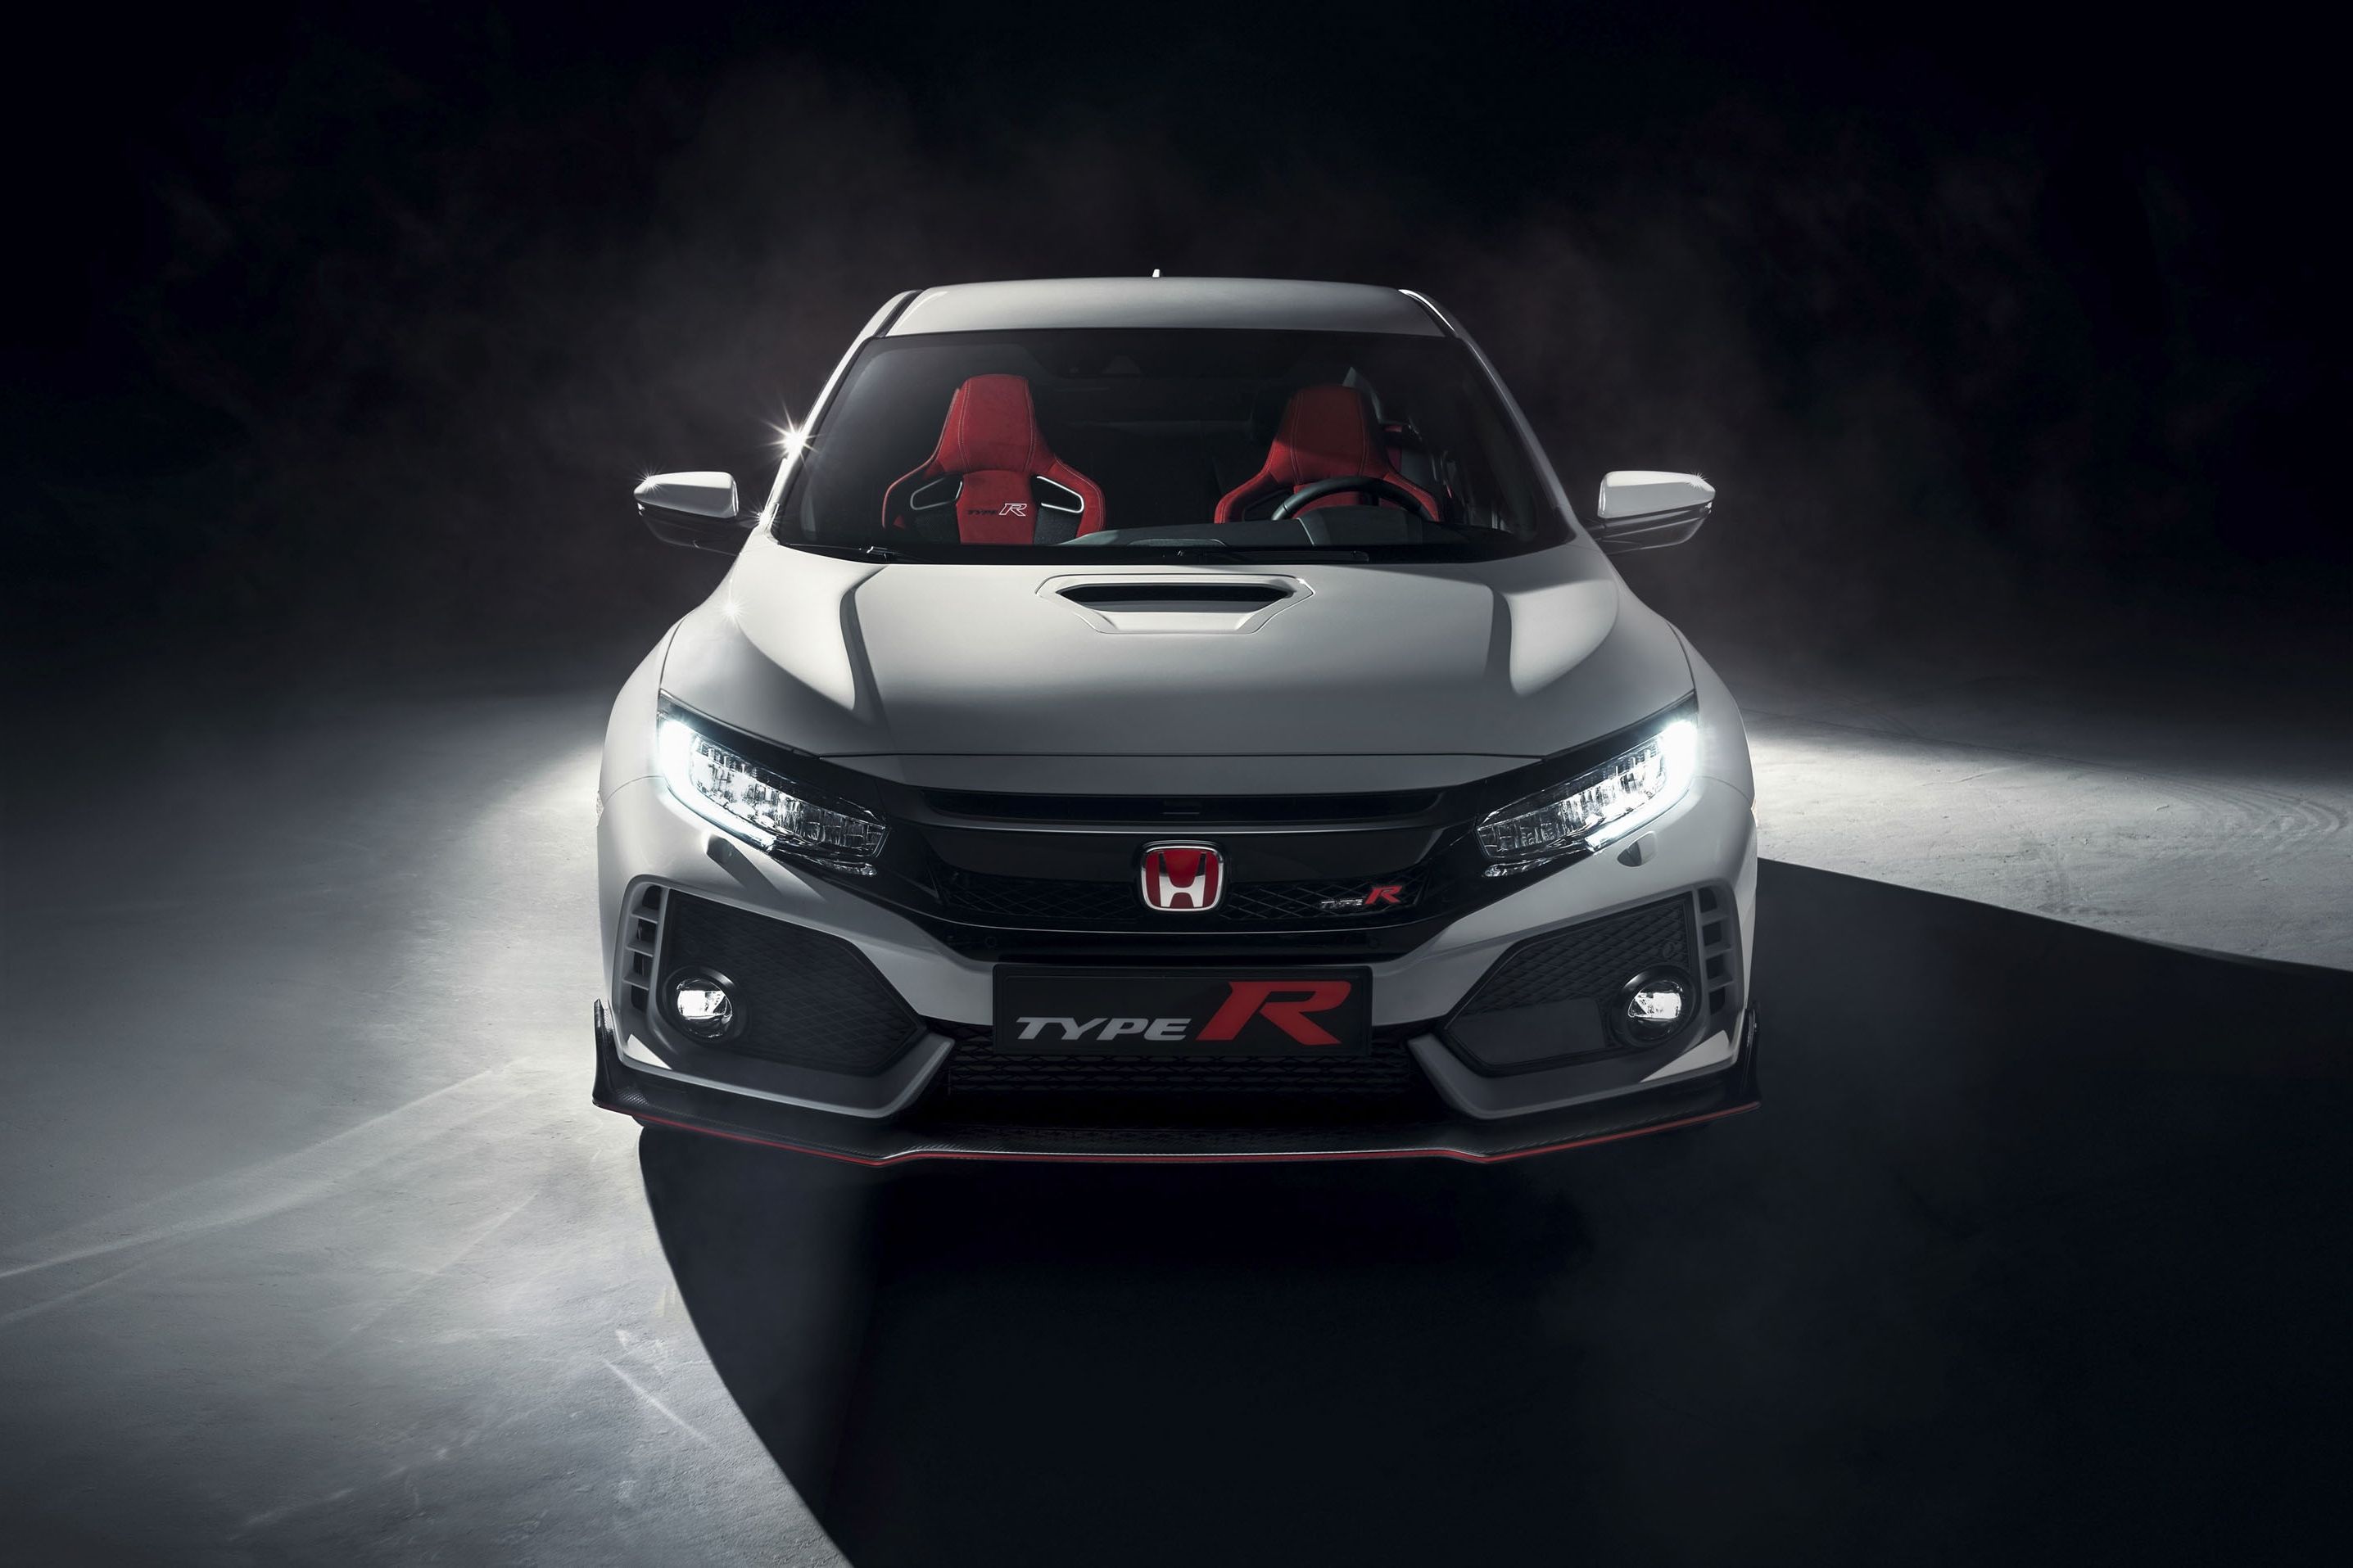 First Civic Type R to be sold in the U.S.